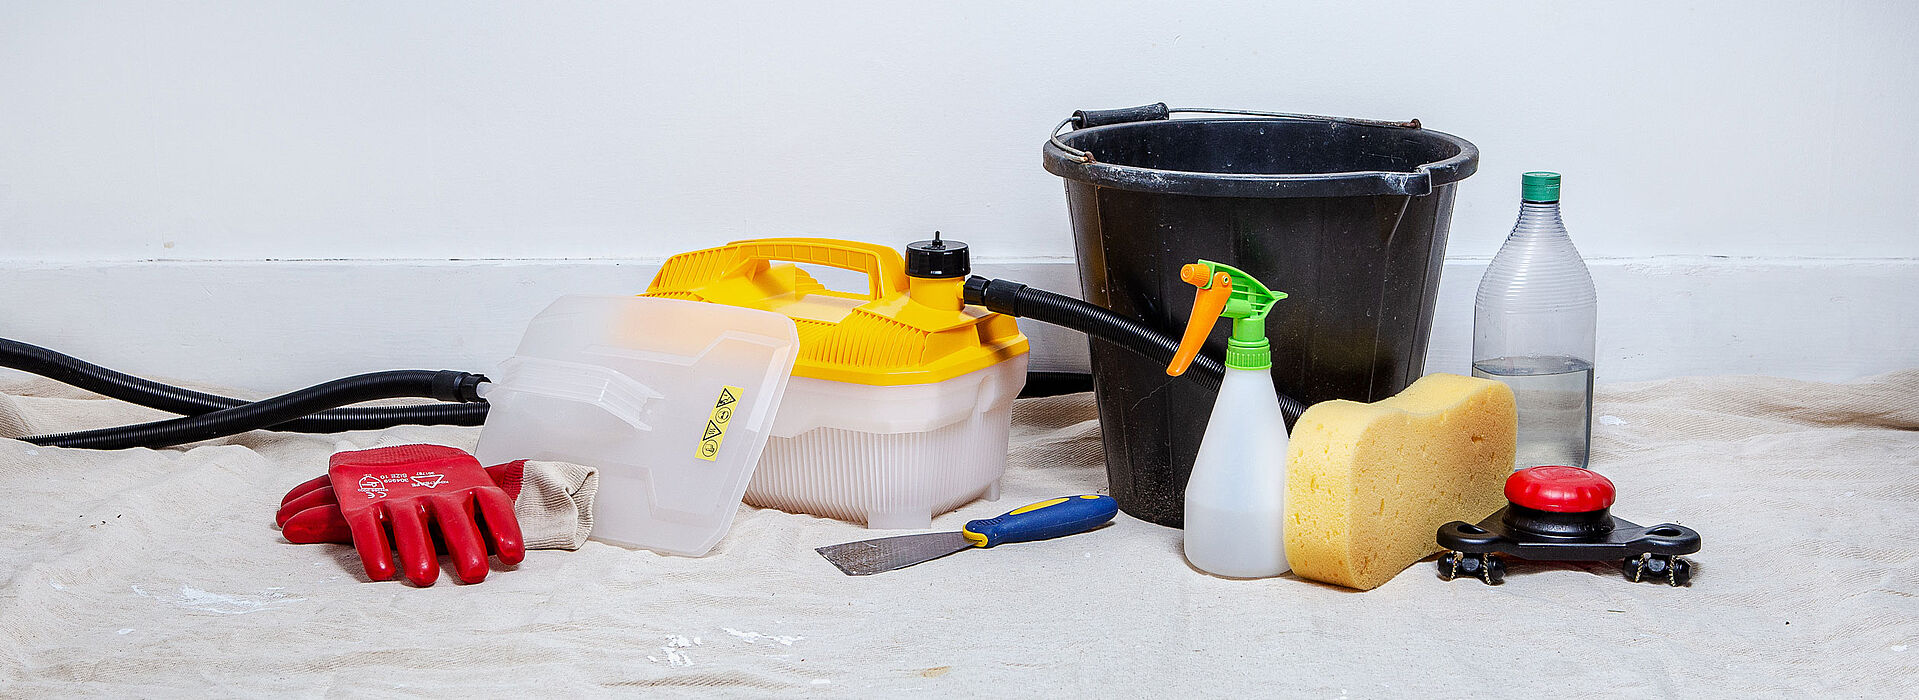 How to Remove Wallpaper Glue Efficiently